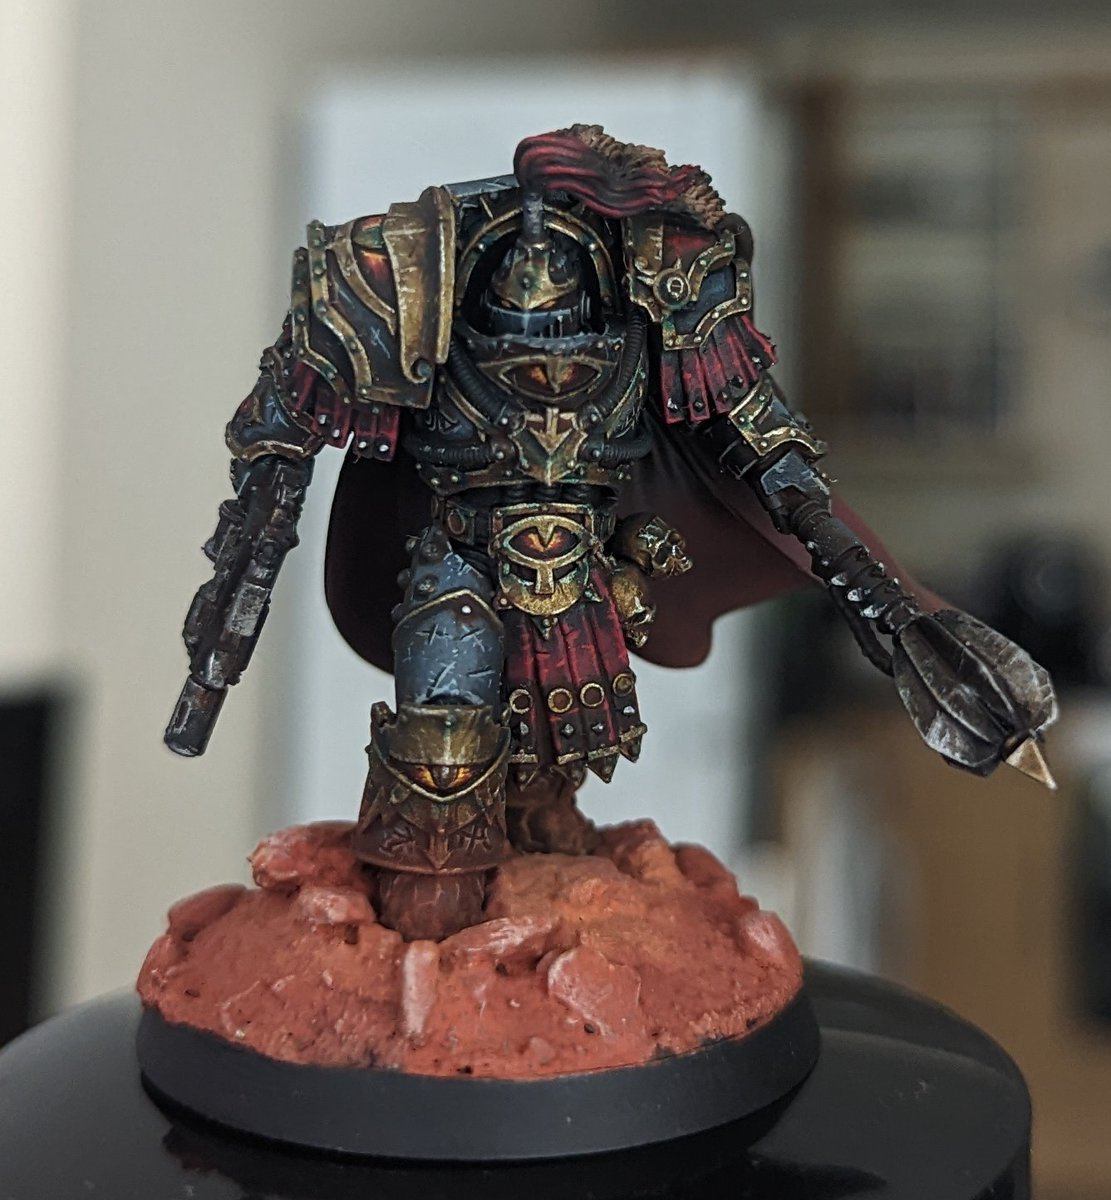 Struggling a bit with photography. Think these look better then my previous bit still not right. My most recent sons of horus models #warhammer #WarhammerCommunity #warhammer30k #warhammer40k #30k #horusheresy #sonsofhorus #spacemarines #armypainting #Warmongers